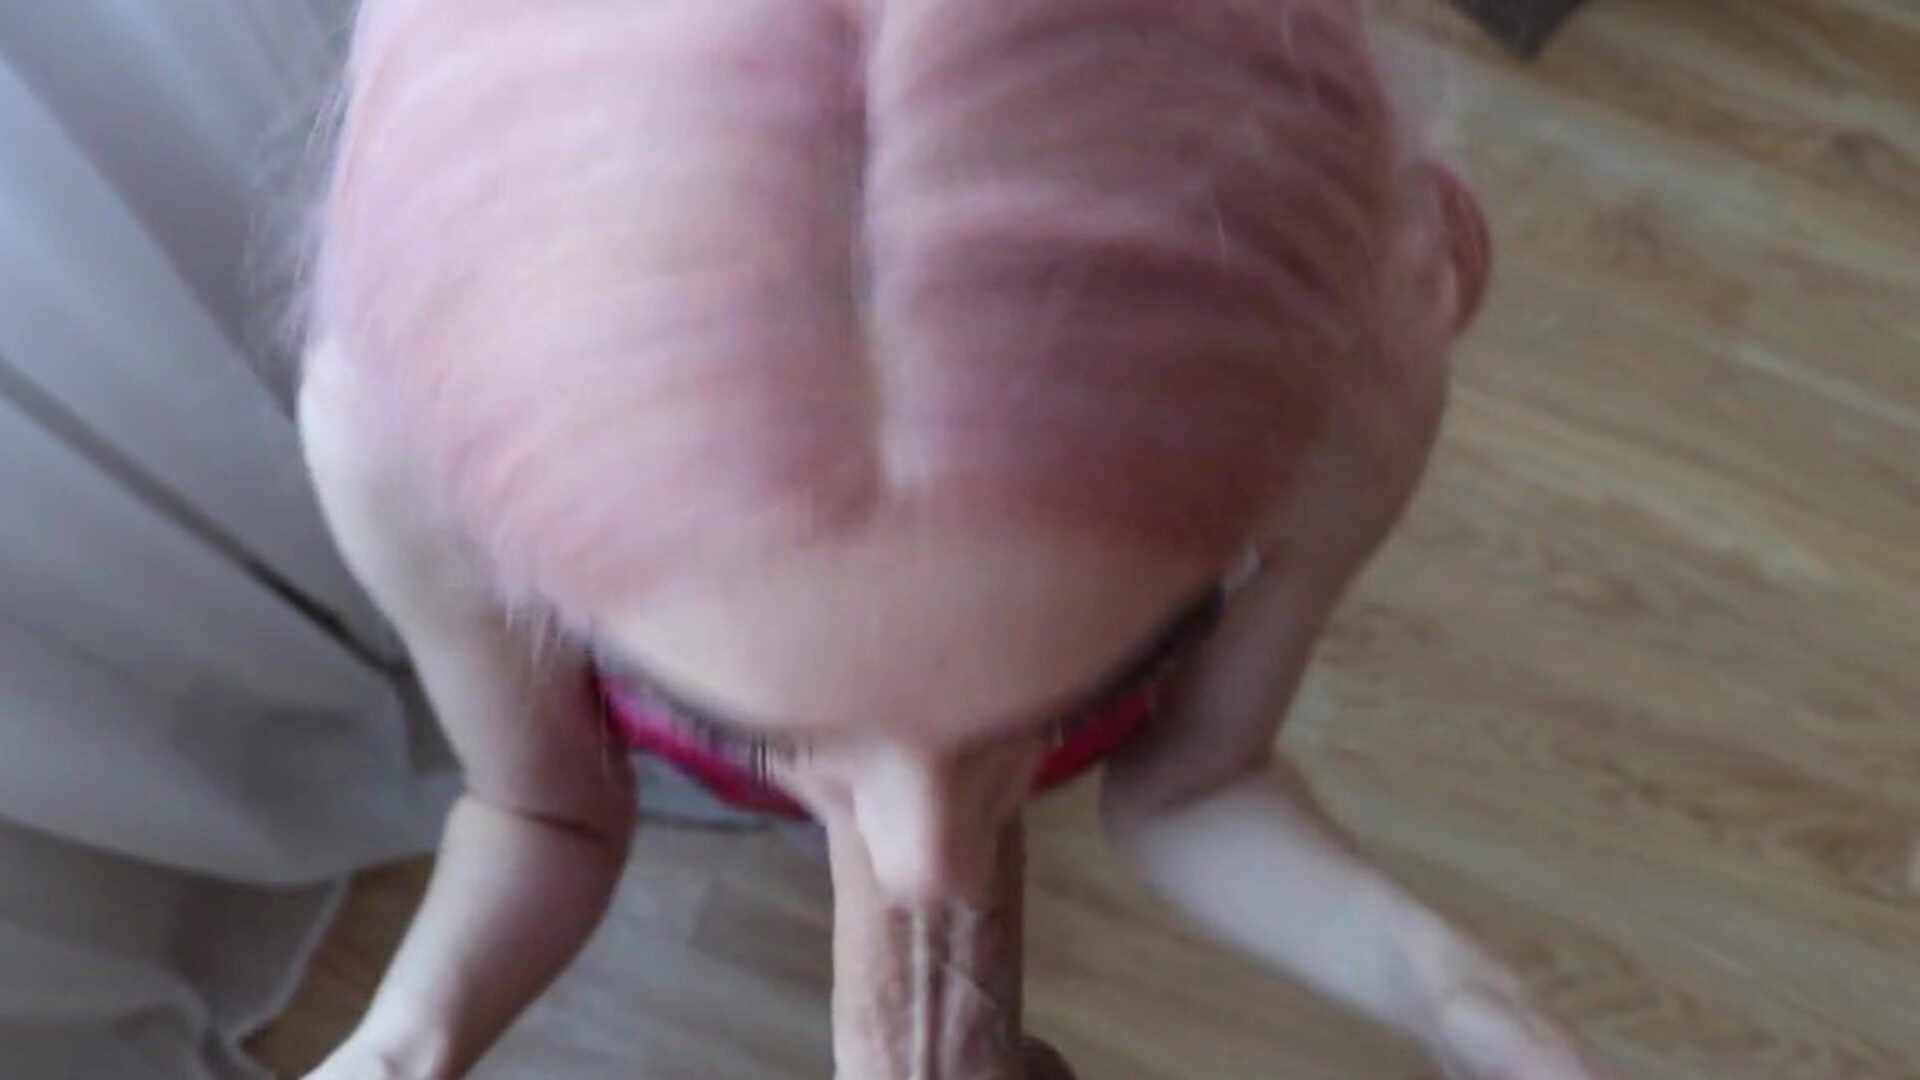 She knows how to Deepthroat this Cock and Swallow all the Load